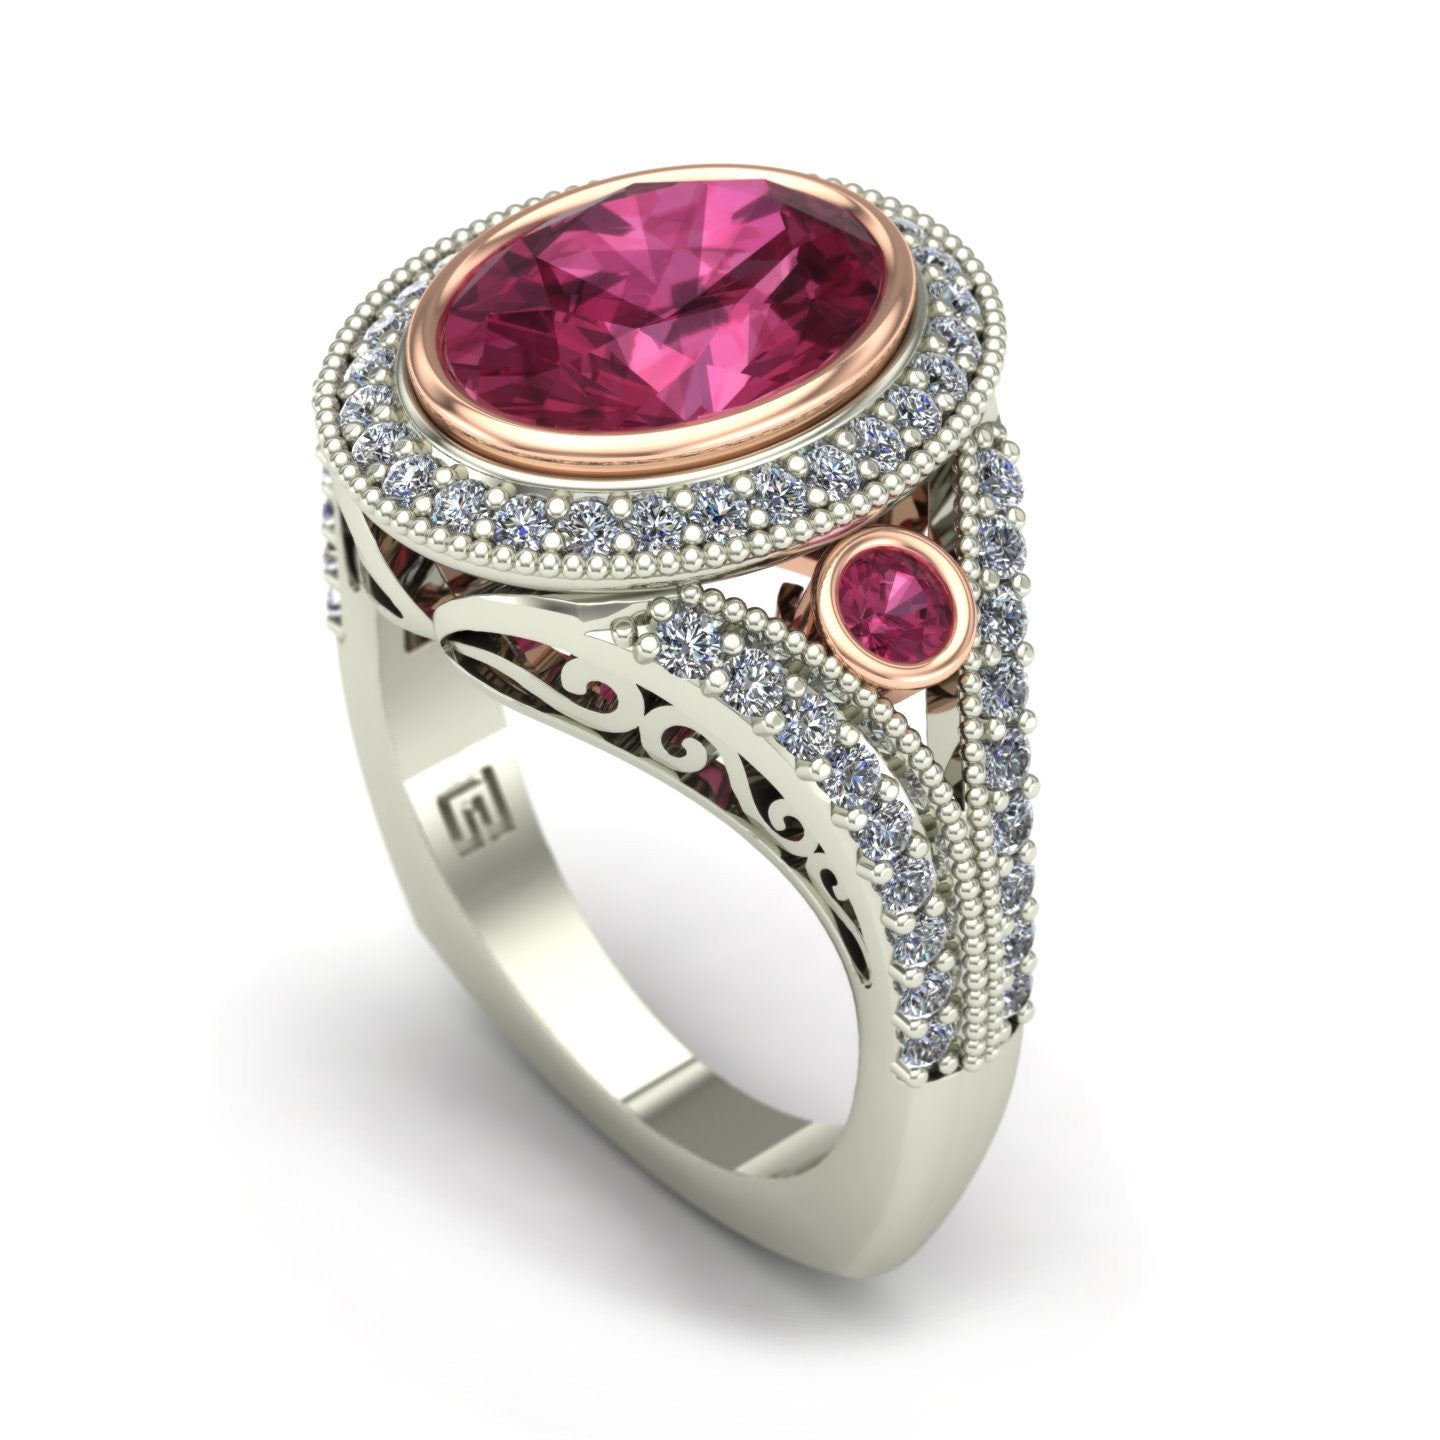 oval bezel set pink tourmaline and diamond two tone split shank ring in 14k rose and white gold - Charles Babb Designs